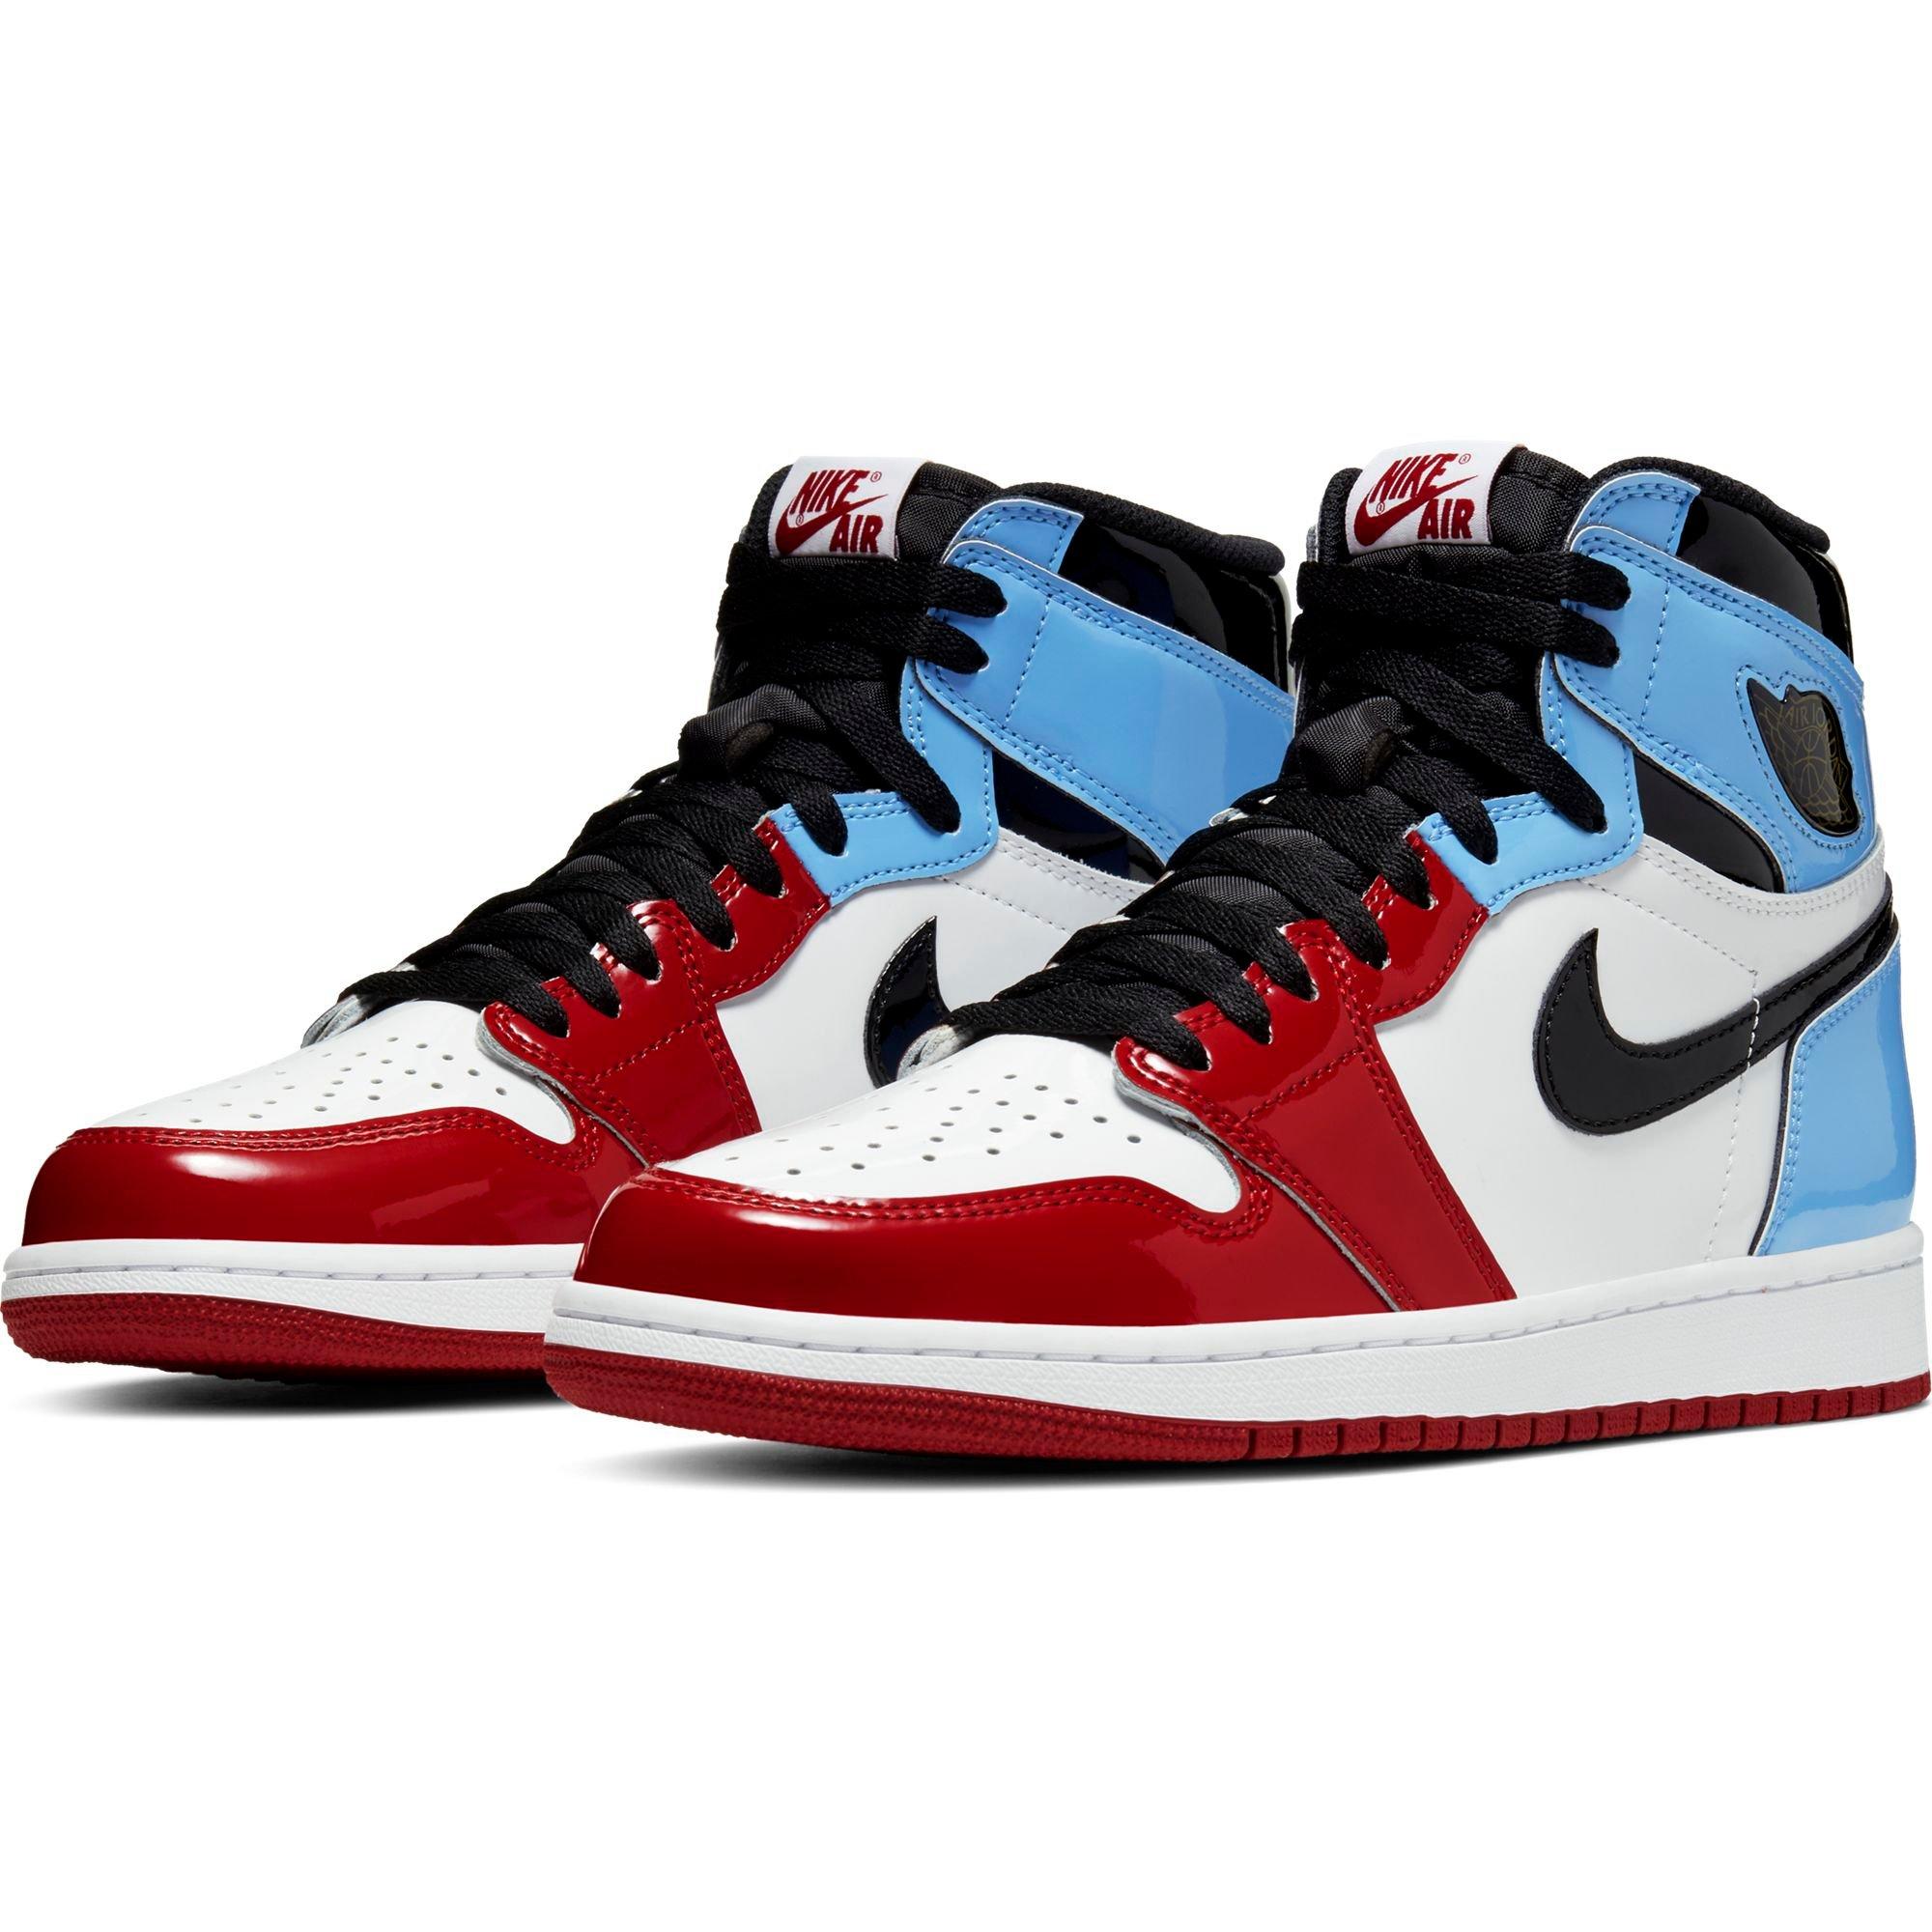 1s blue and red